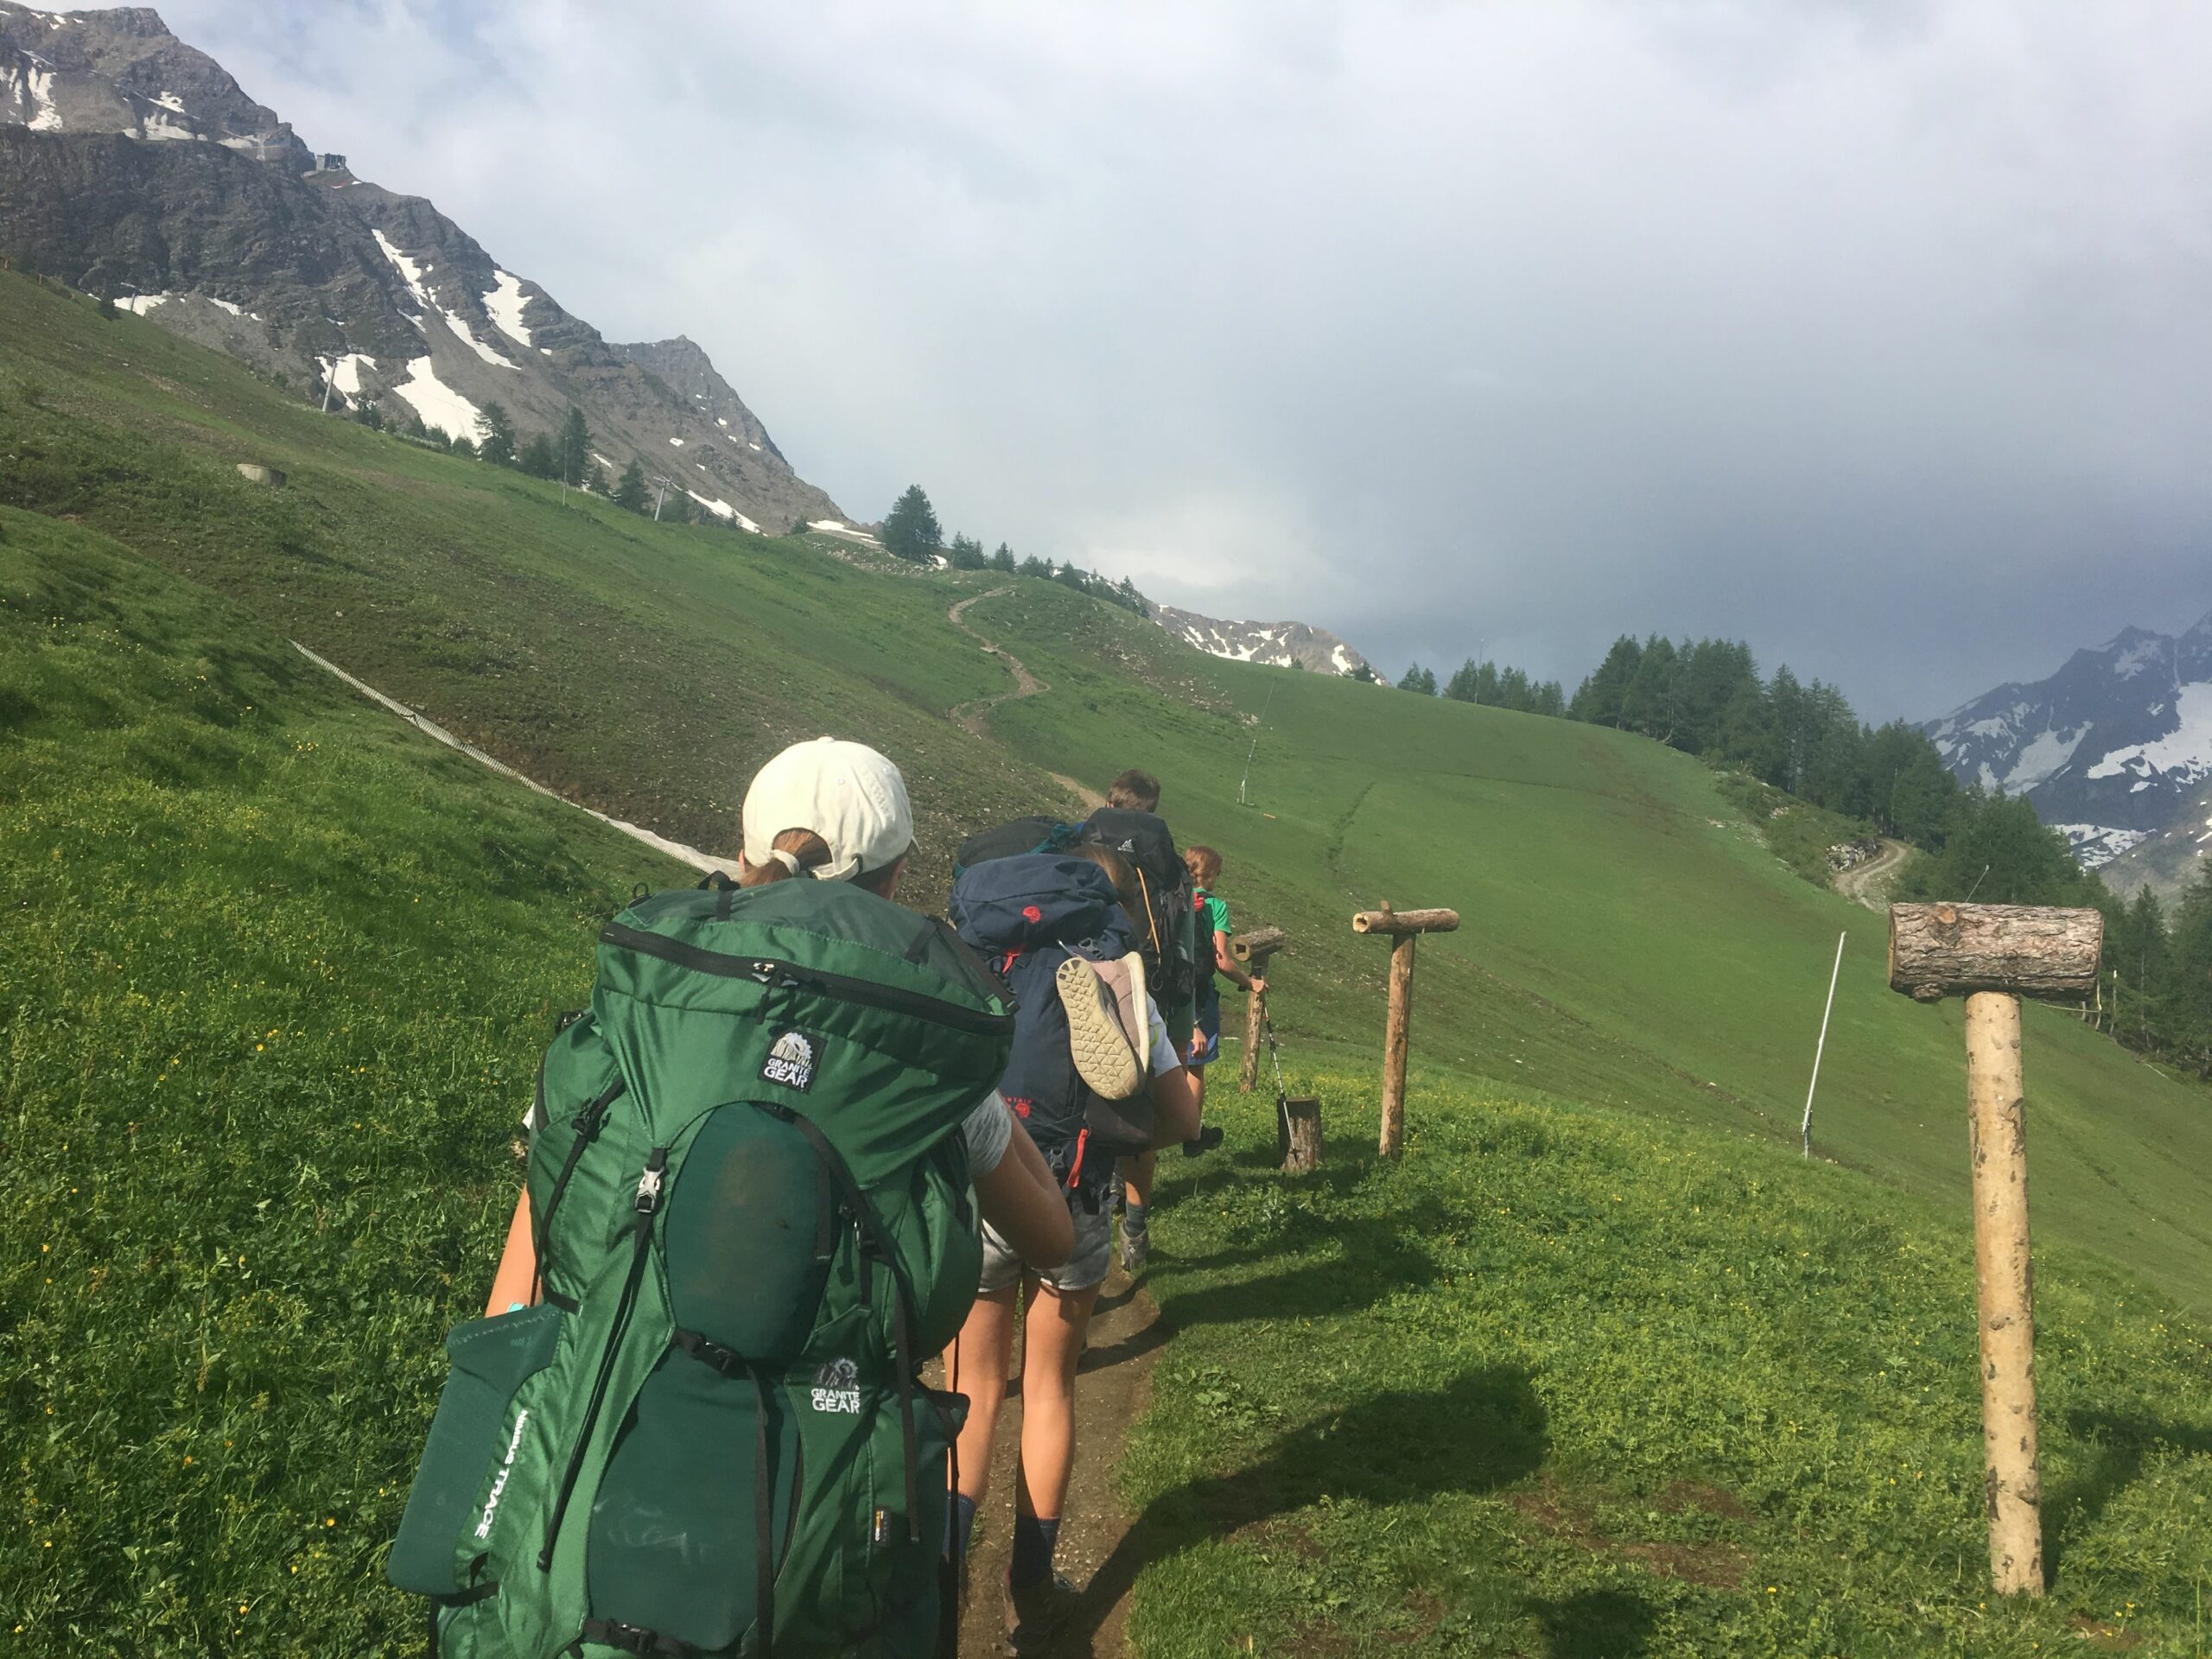 Hiking in grassy hills in the alps